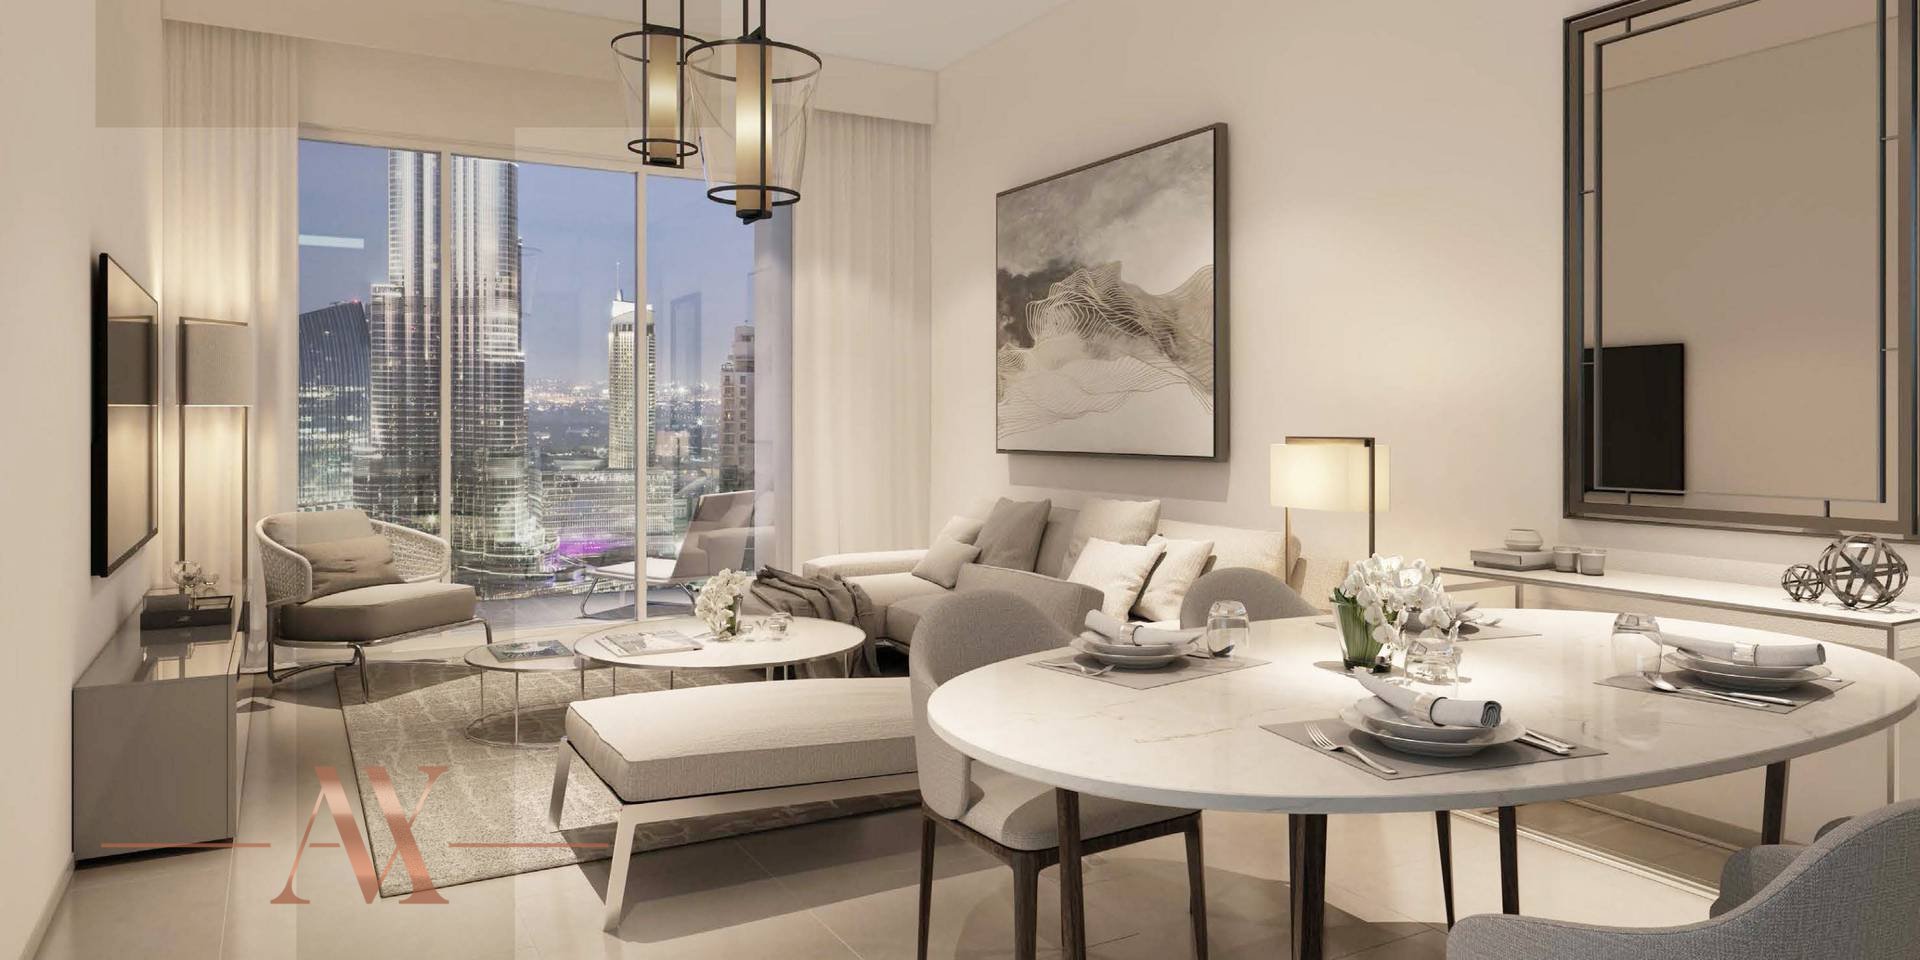 Appartement à ACT ONE | ACT TWO TOWERS, The Opera District, Dubai, EAU, 2 chambres, 124 m² № 23826 - 1